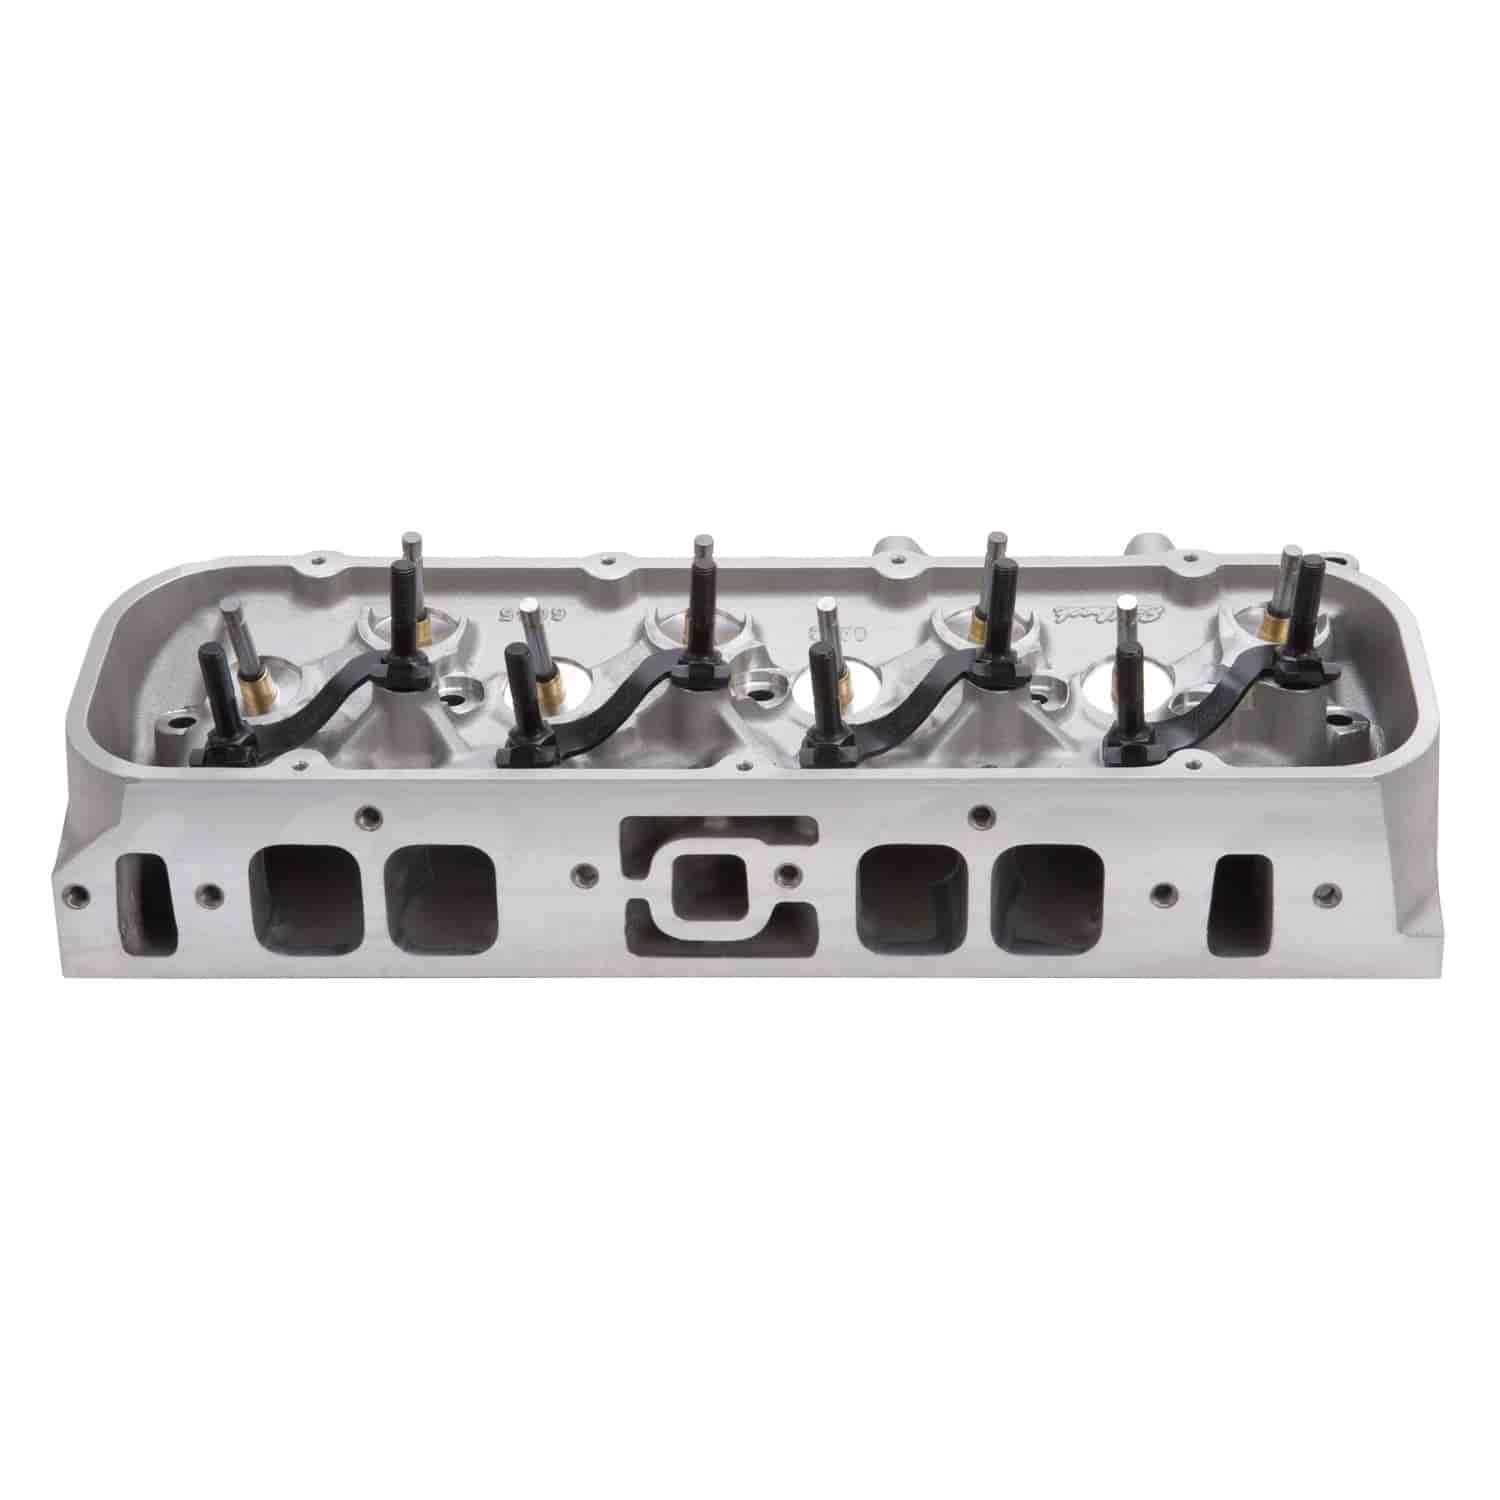 Performer RPM High Compression 454-O Cylinder Heads for Big Block Chevy